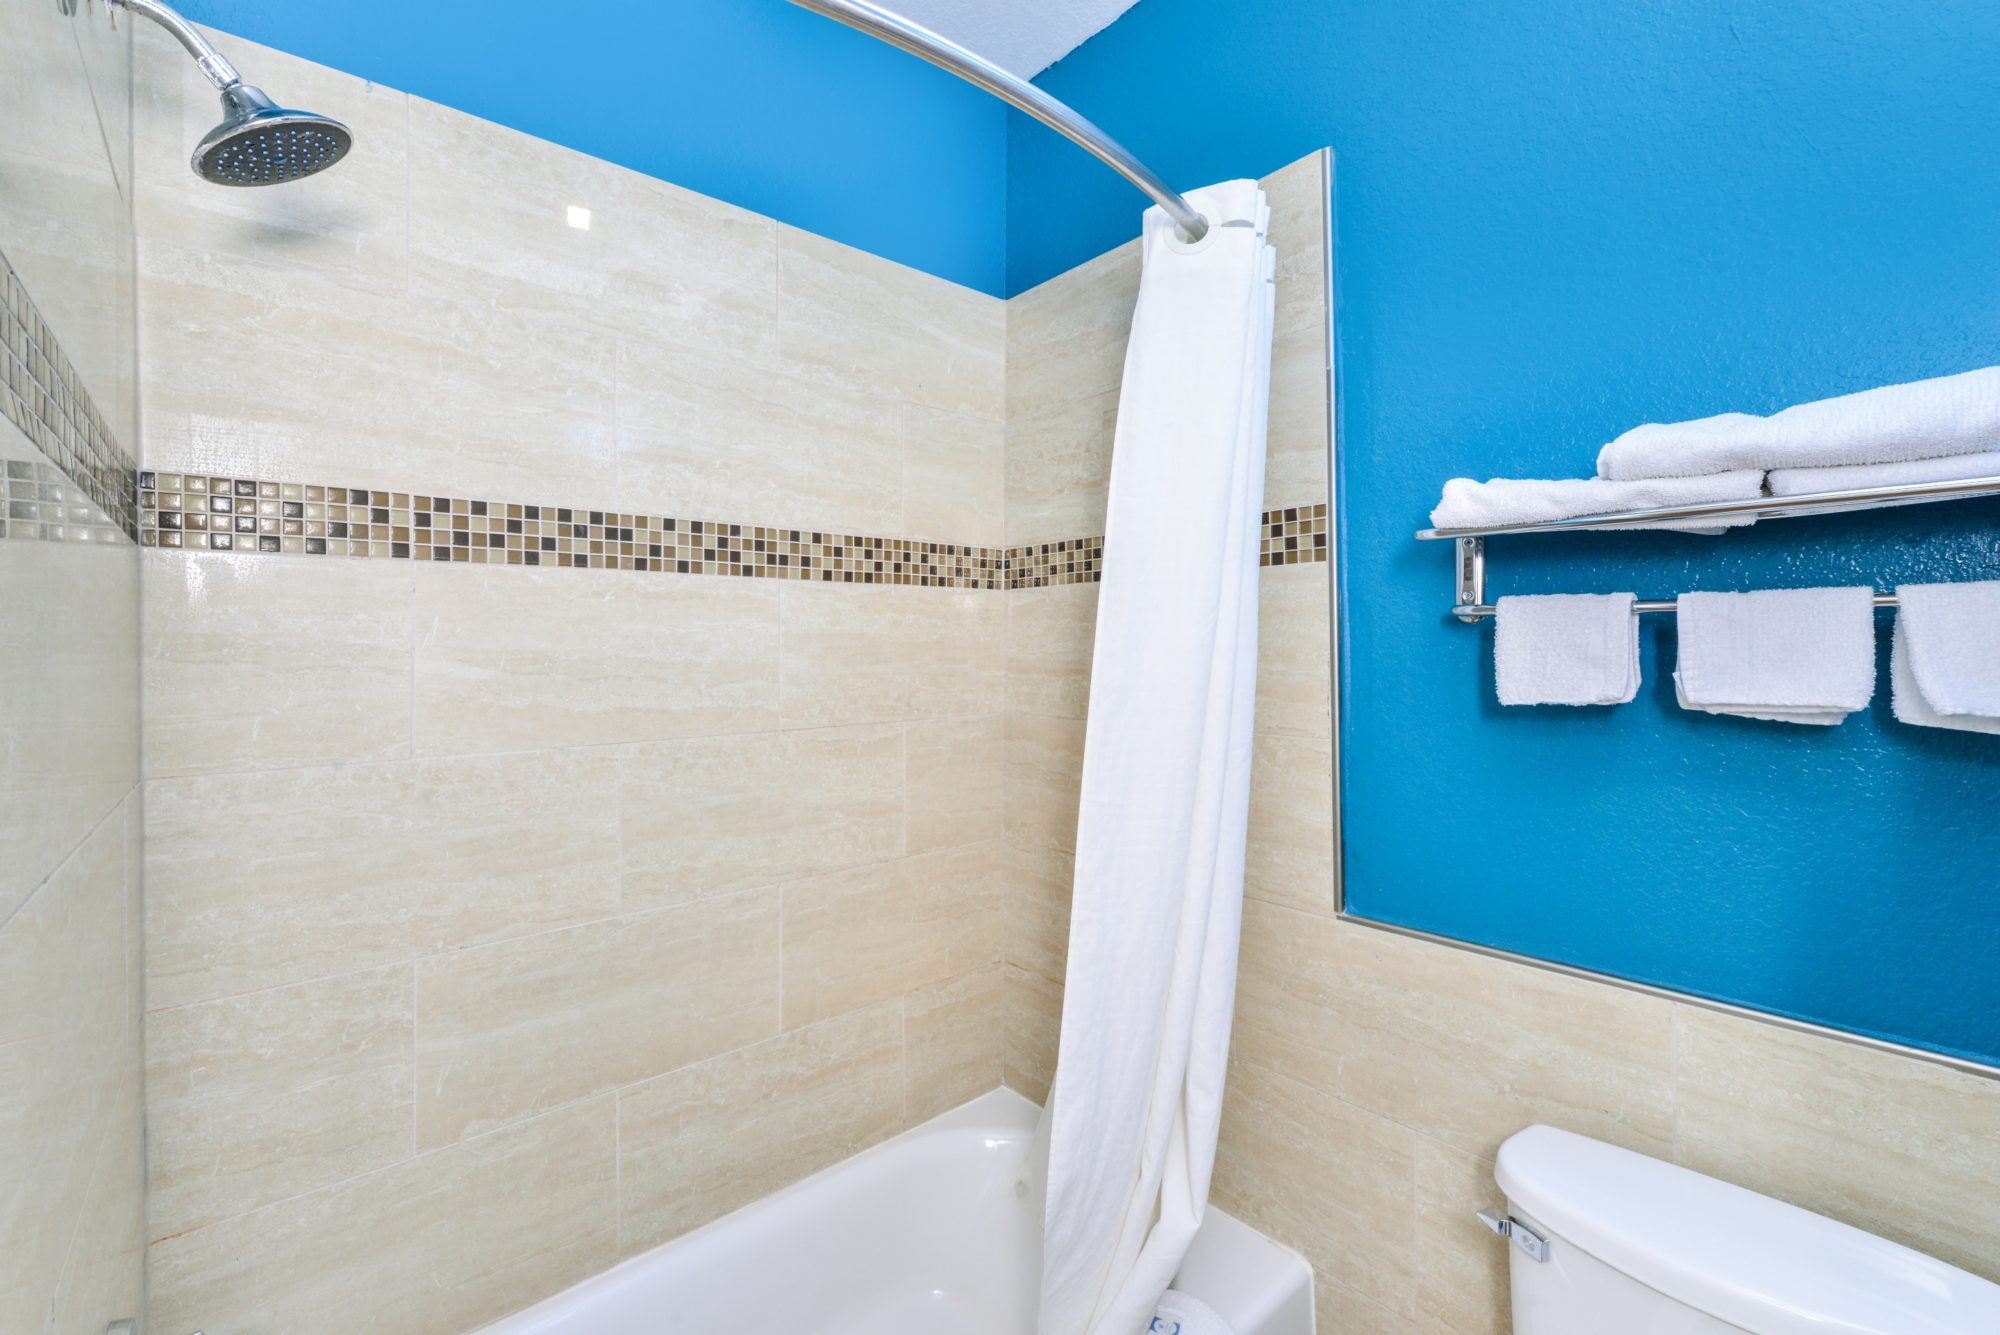 Shower tub with shower curtain, twoel rail and shelf with towels, toilet